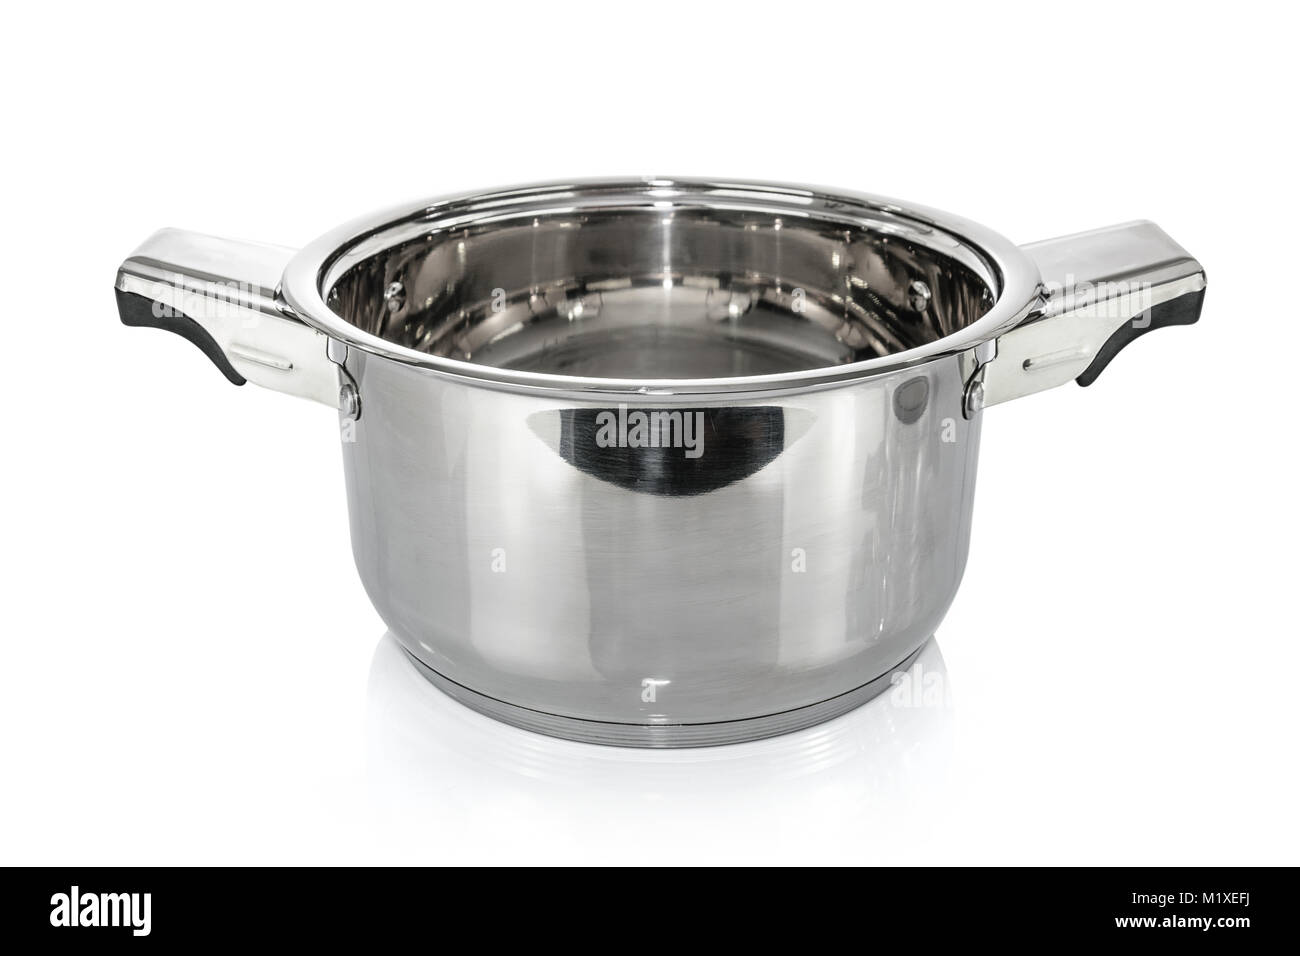 https://c8.alamy.com/comp/M1XEFJ/premium-stainless-steel-metal-cooking-pot-isolated-on-a-white-background-M1XEFJ.jpg